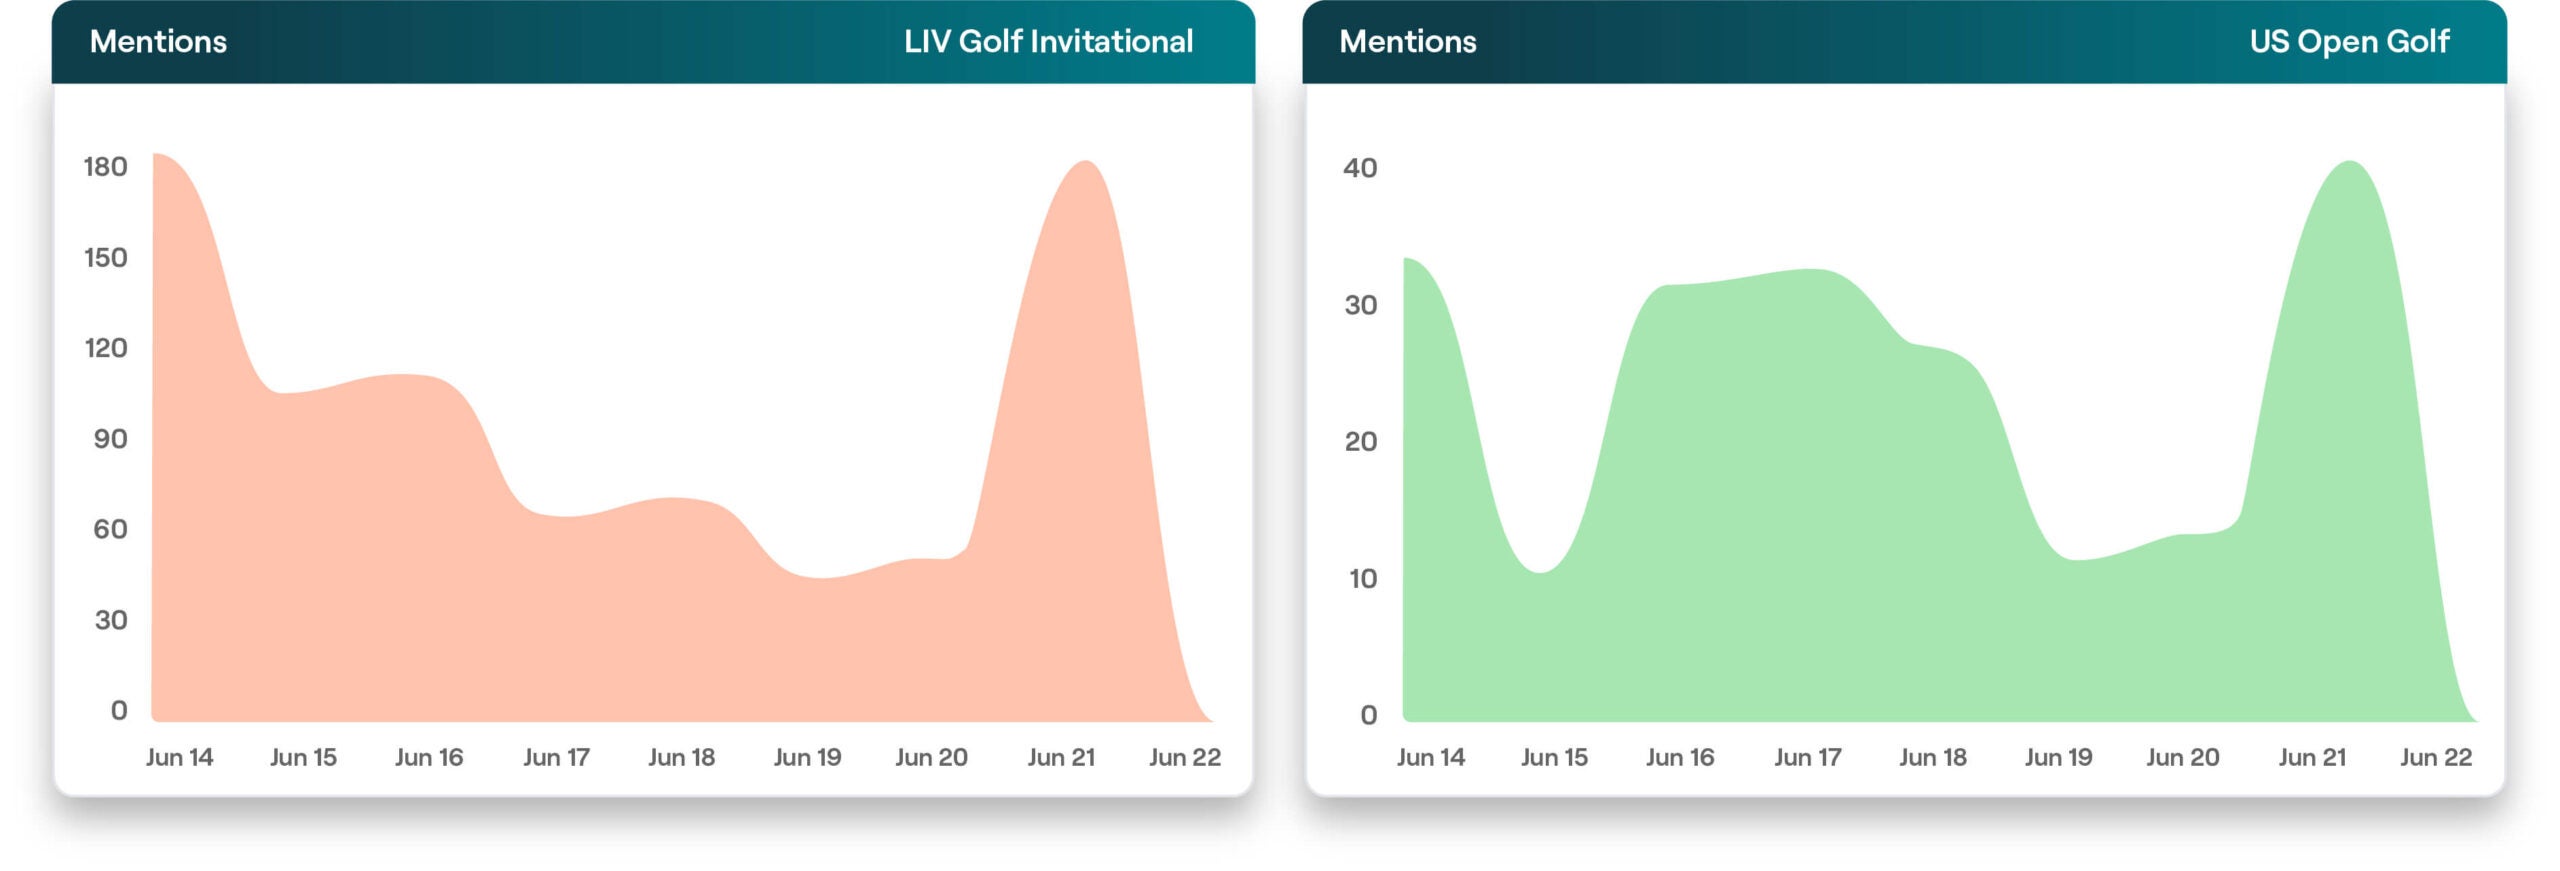 LIV and PGA social mentions side-by-side